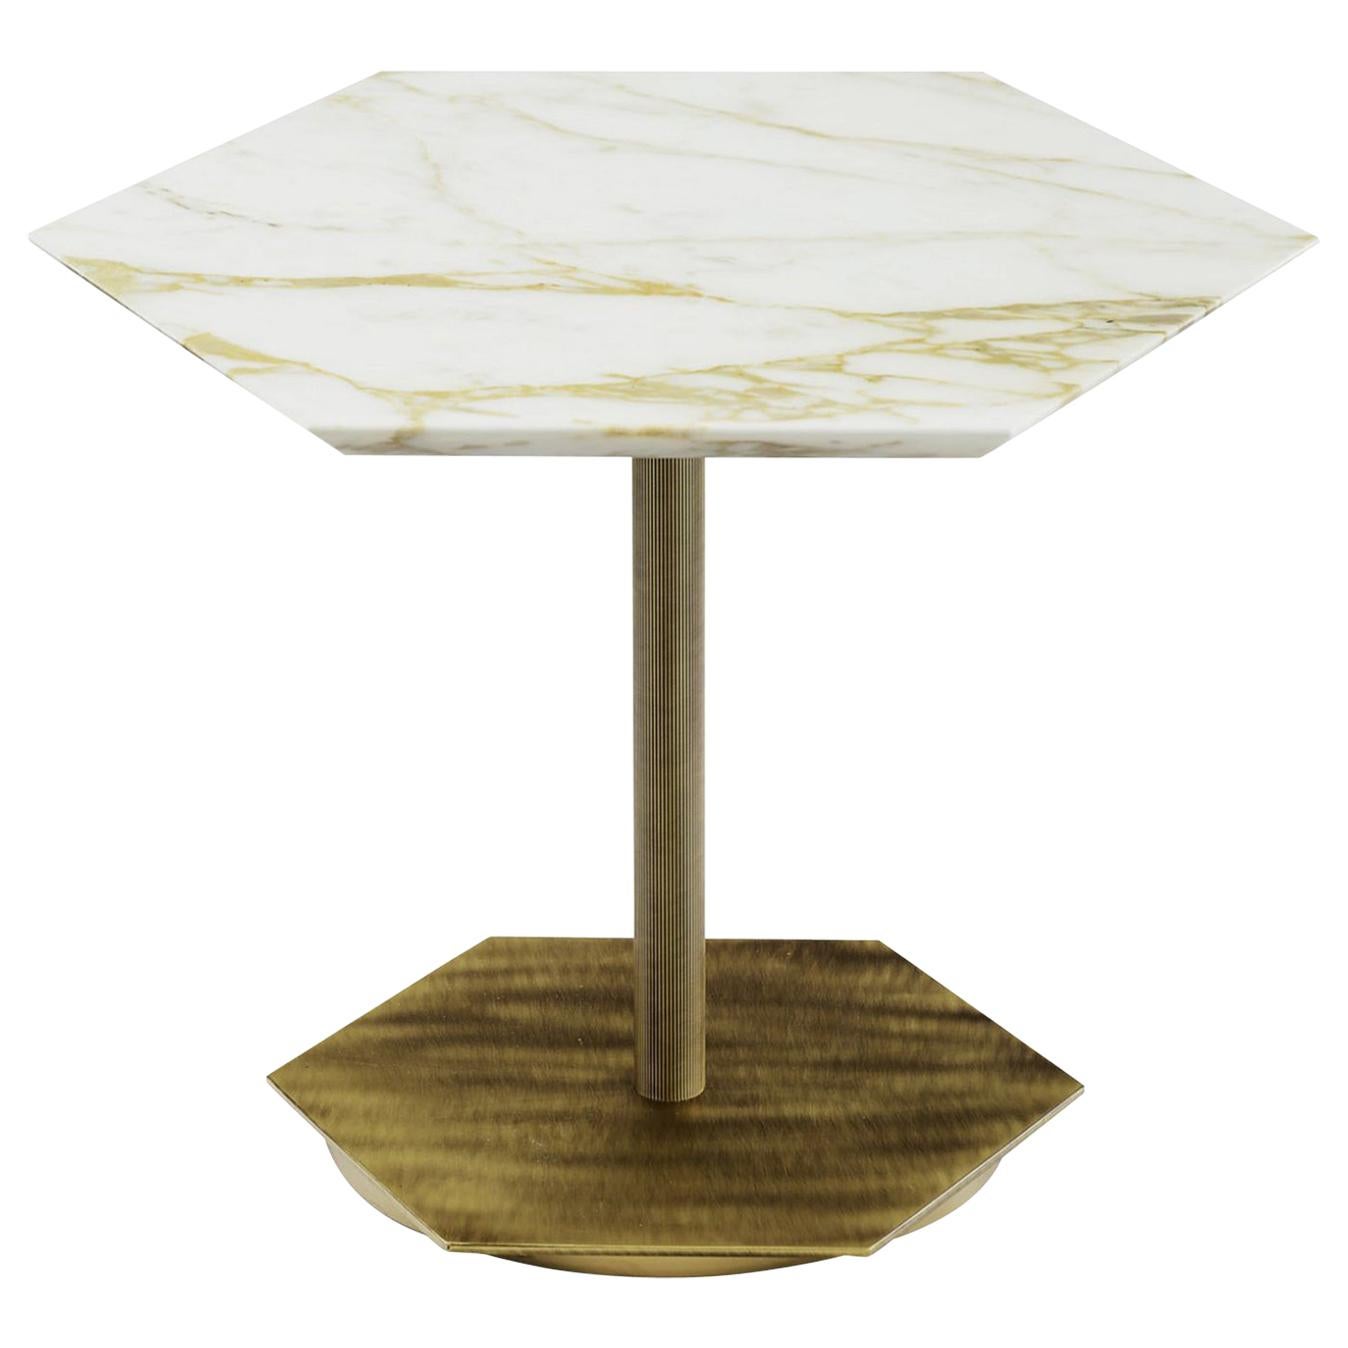 Ted White Coffee Table